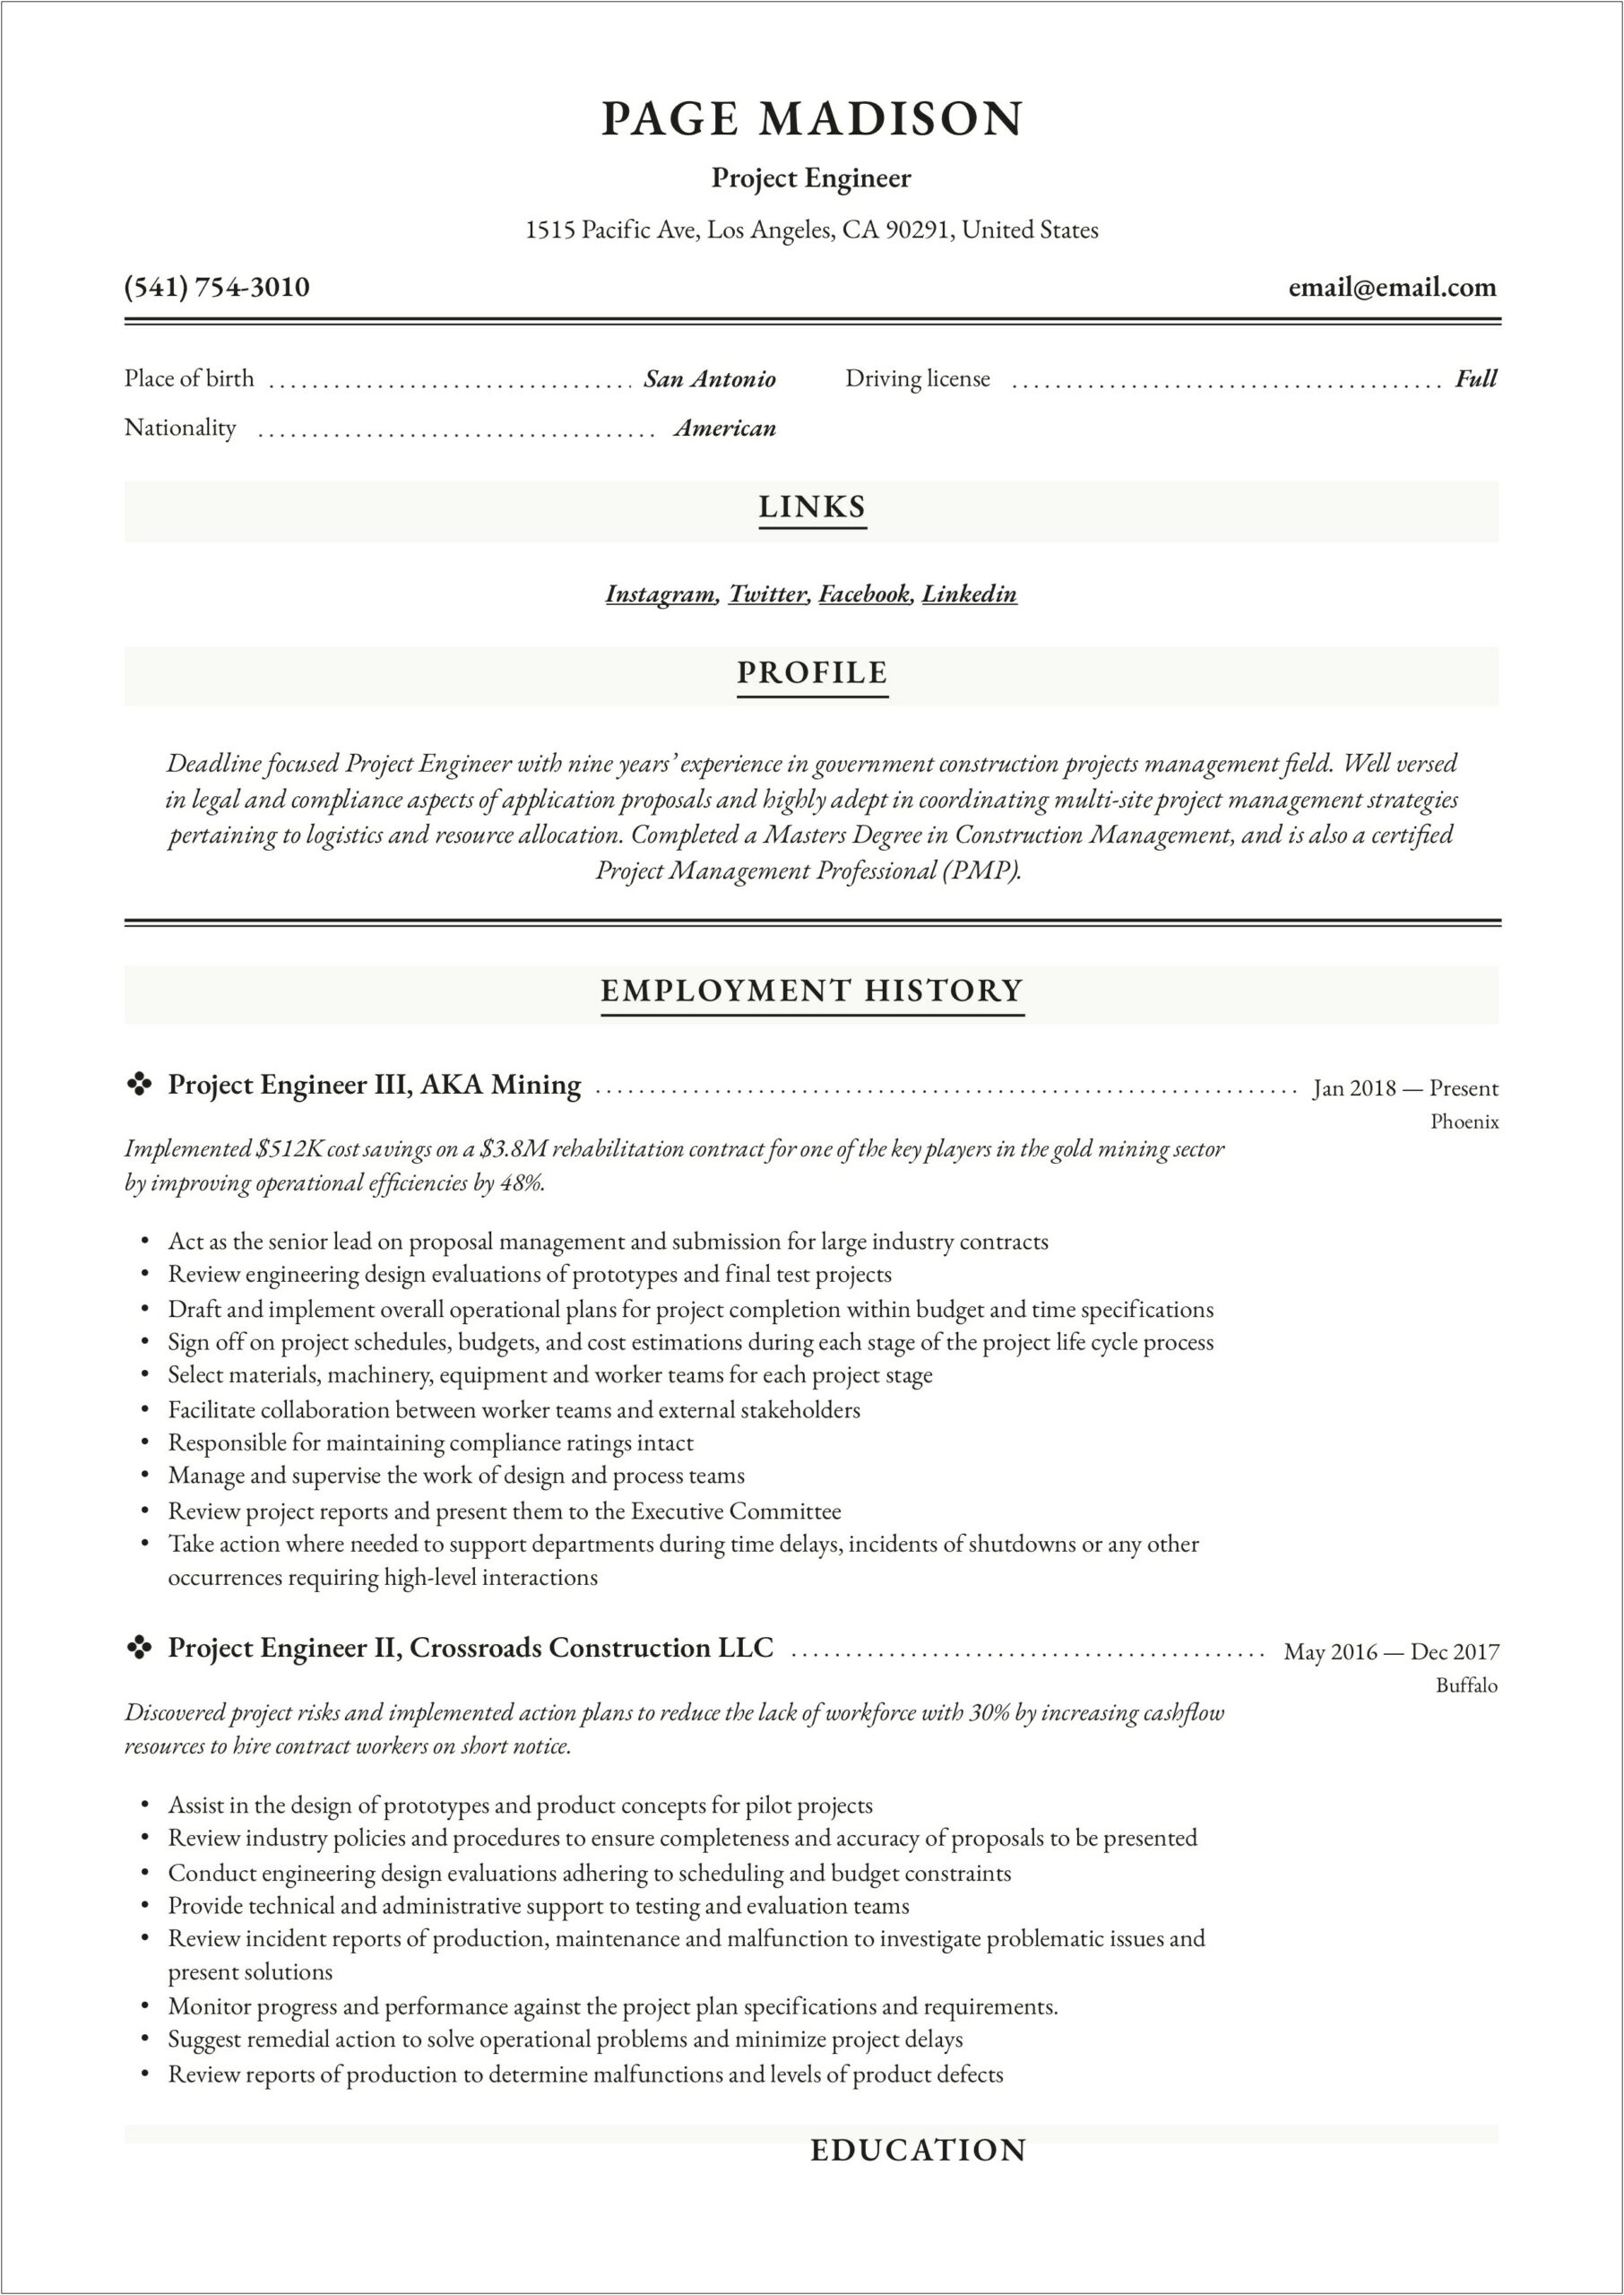 Mechanical Engineer Oil And Gas Resume Samples